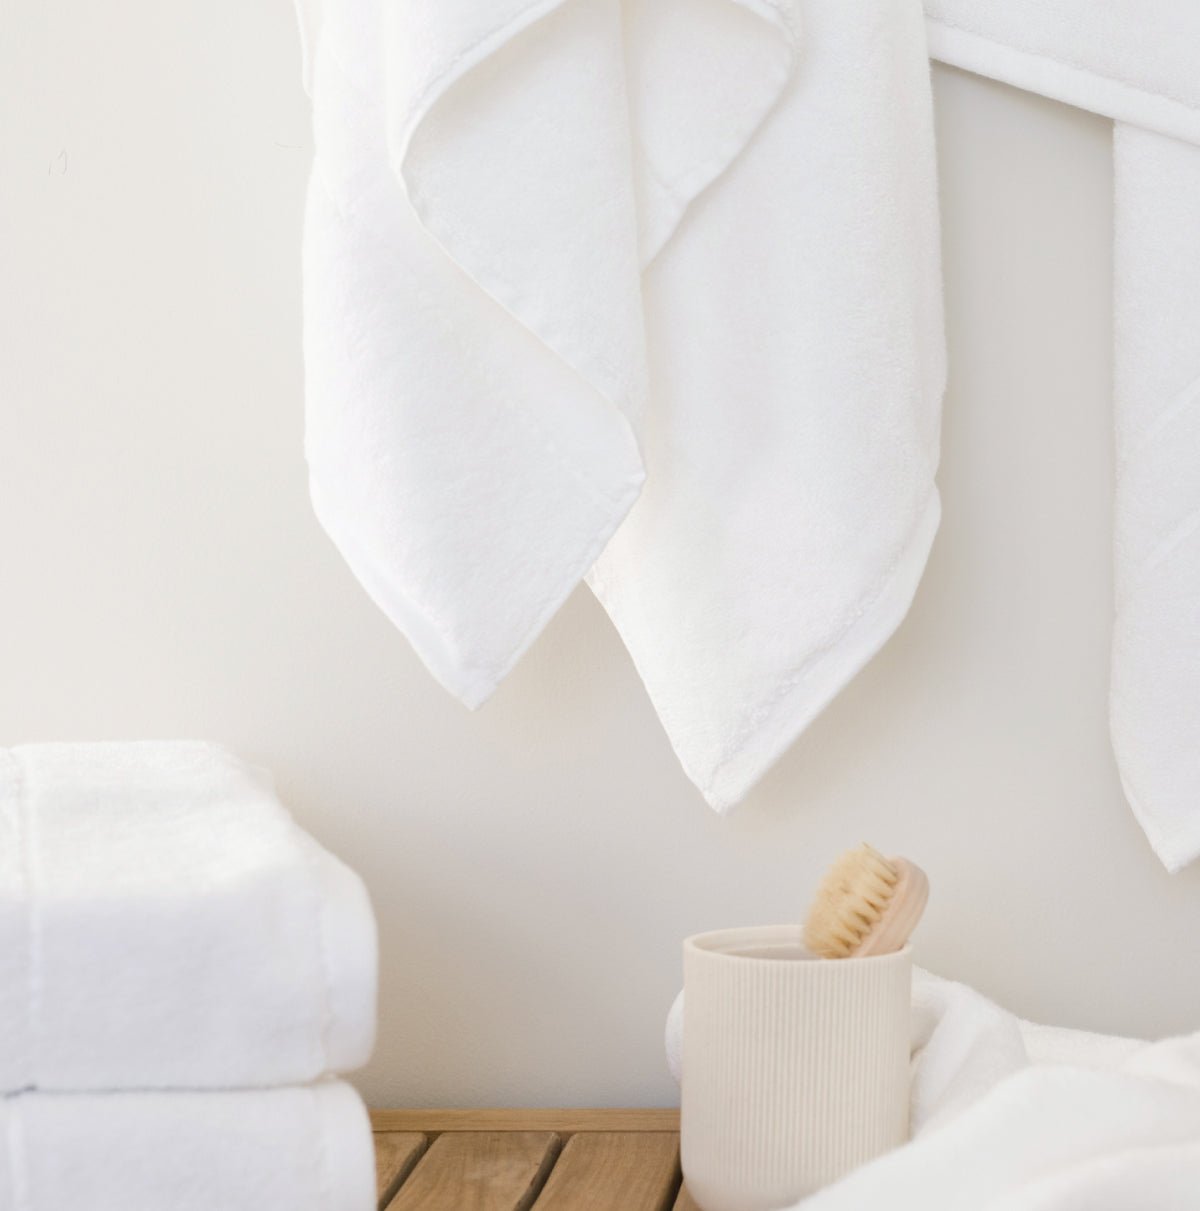 Premium Plush Bath Towels in the color white. Photo of Premium Plush Bath Towels taken in a bathroom showing the towels which are hung from a towel rack. The towels are hung over a wooden shower bench